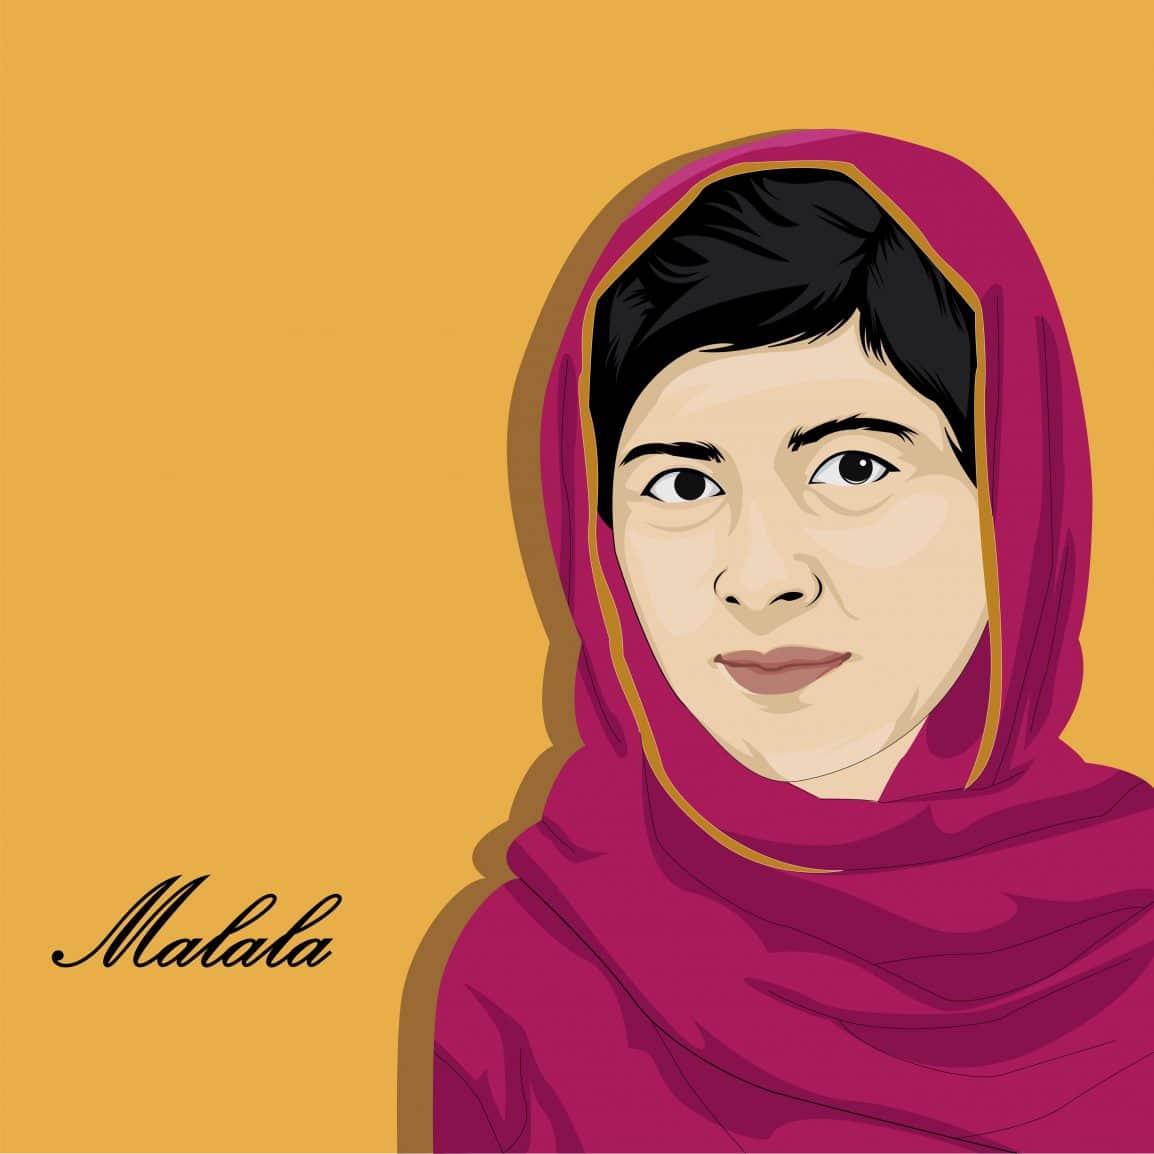 Malala Yousafzai: 'It's hard to kill. Maybe that's why his hand was shaking'